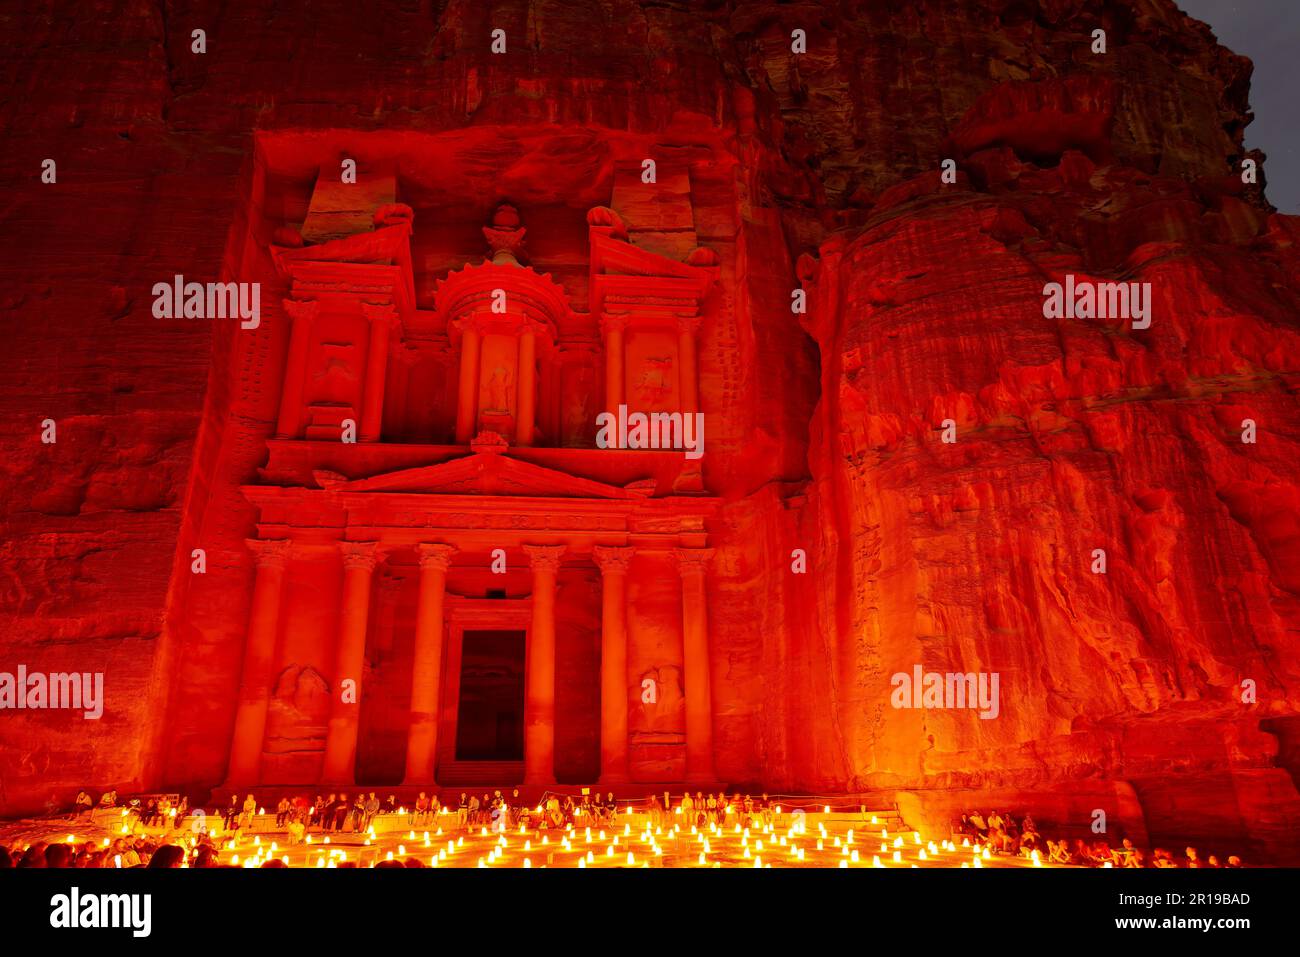 Jordan. Petra archaeological city. Al Khazneh (the Treasury) by night with candle lights Stock Photo